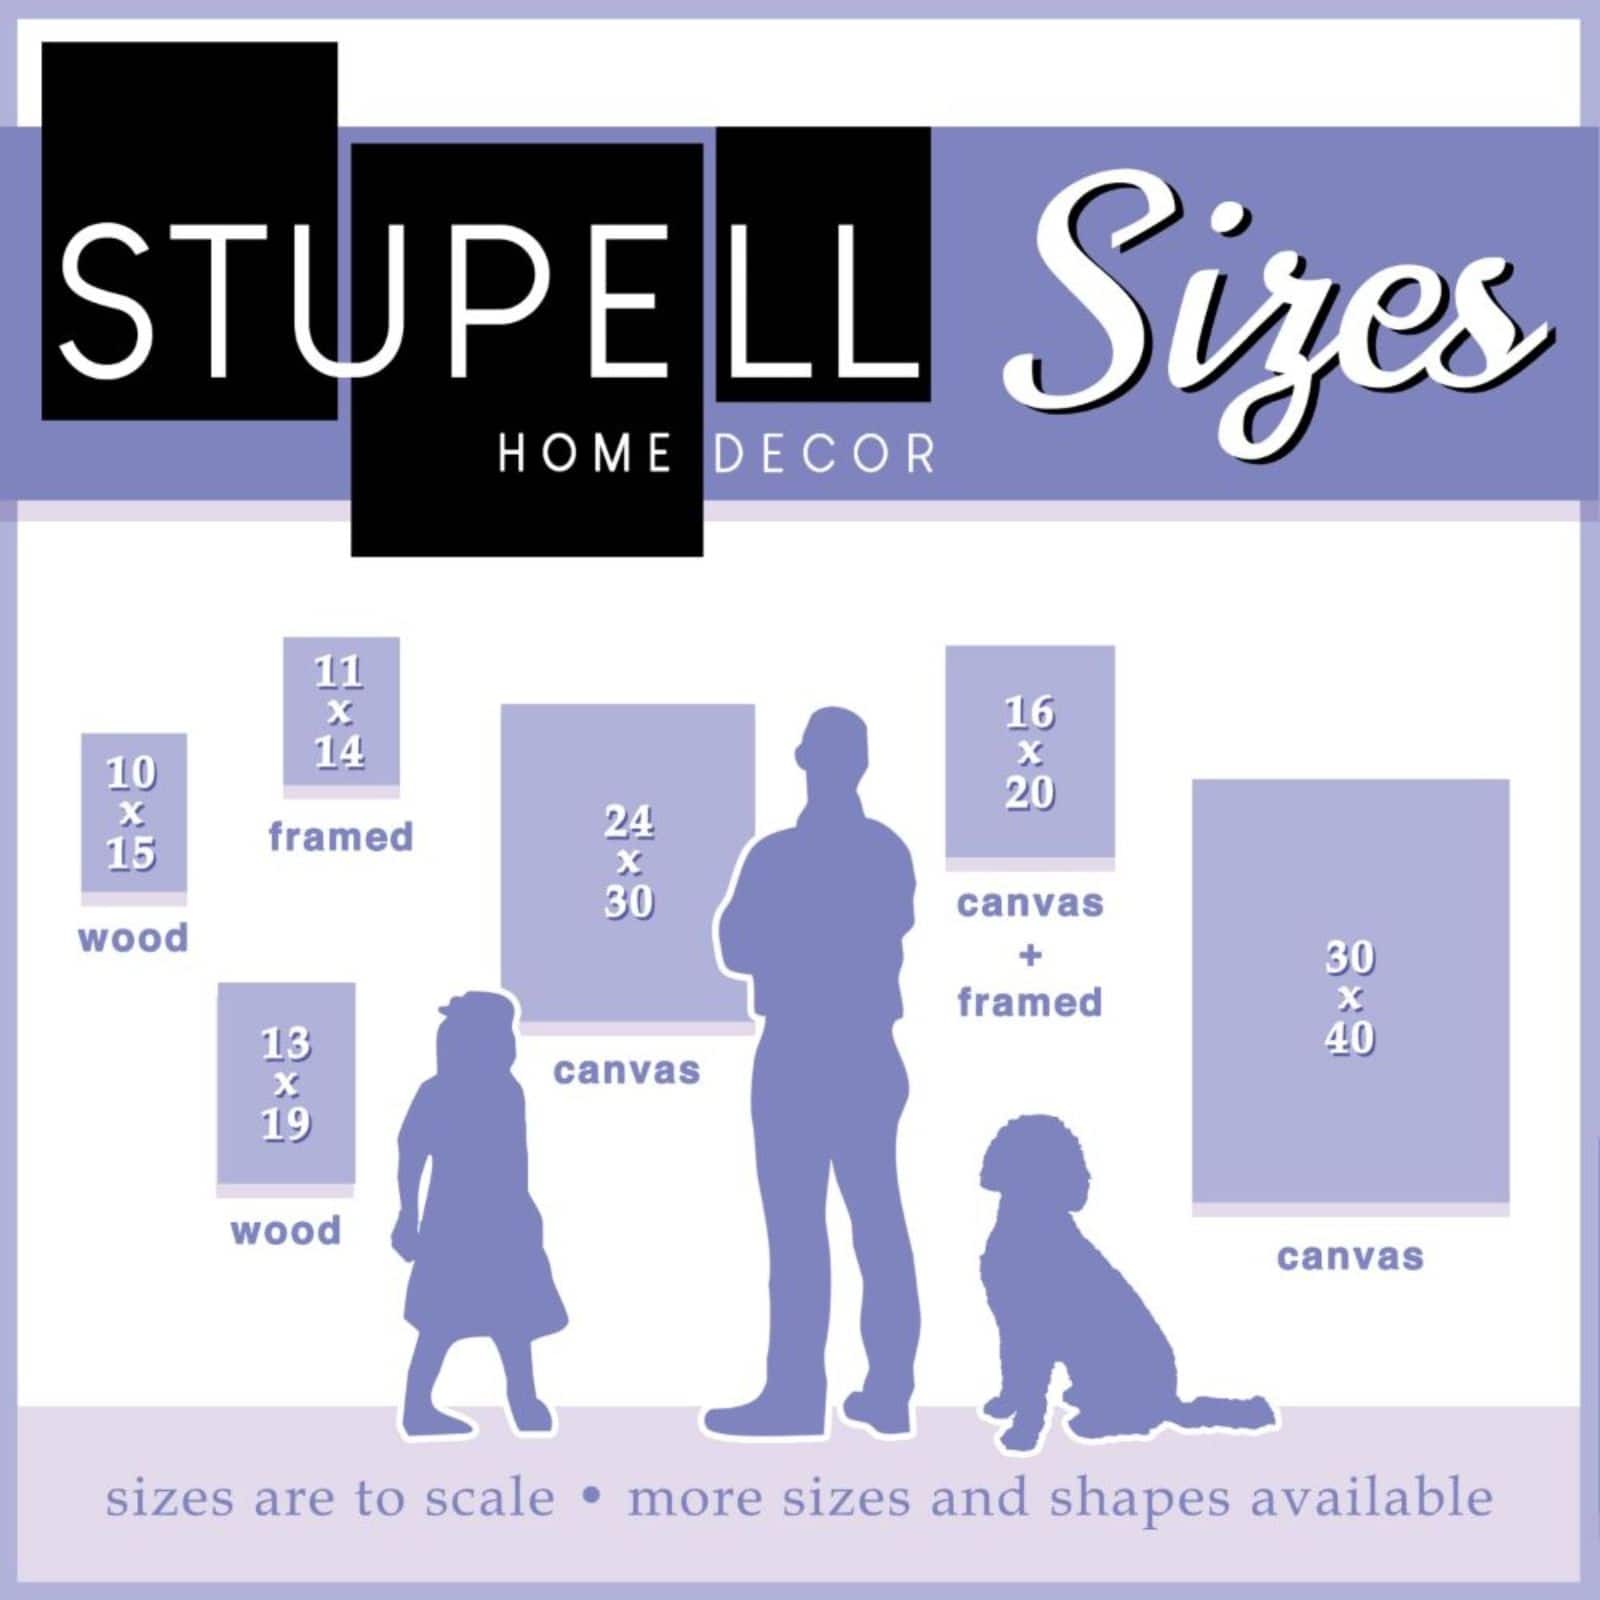 Stupell Industries Take Your Shoes Off Canvas Wall Sign